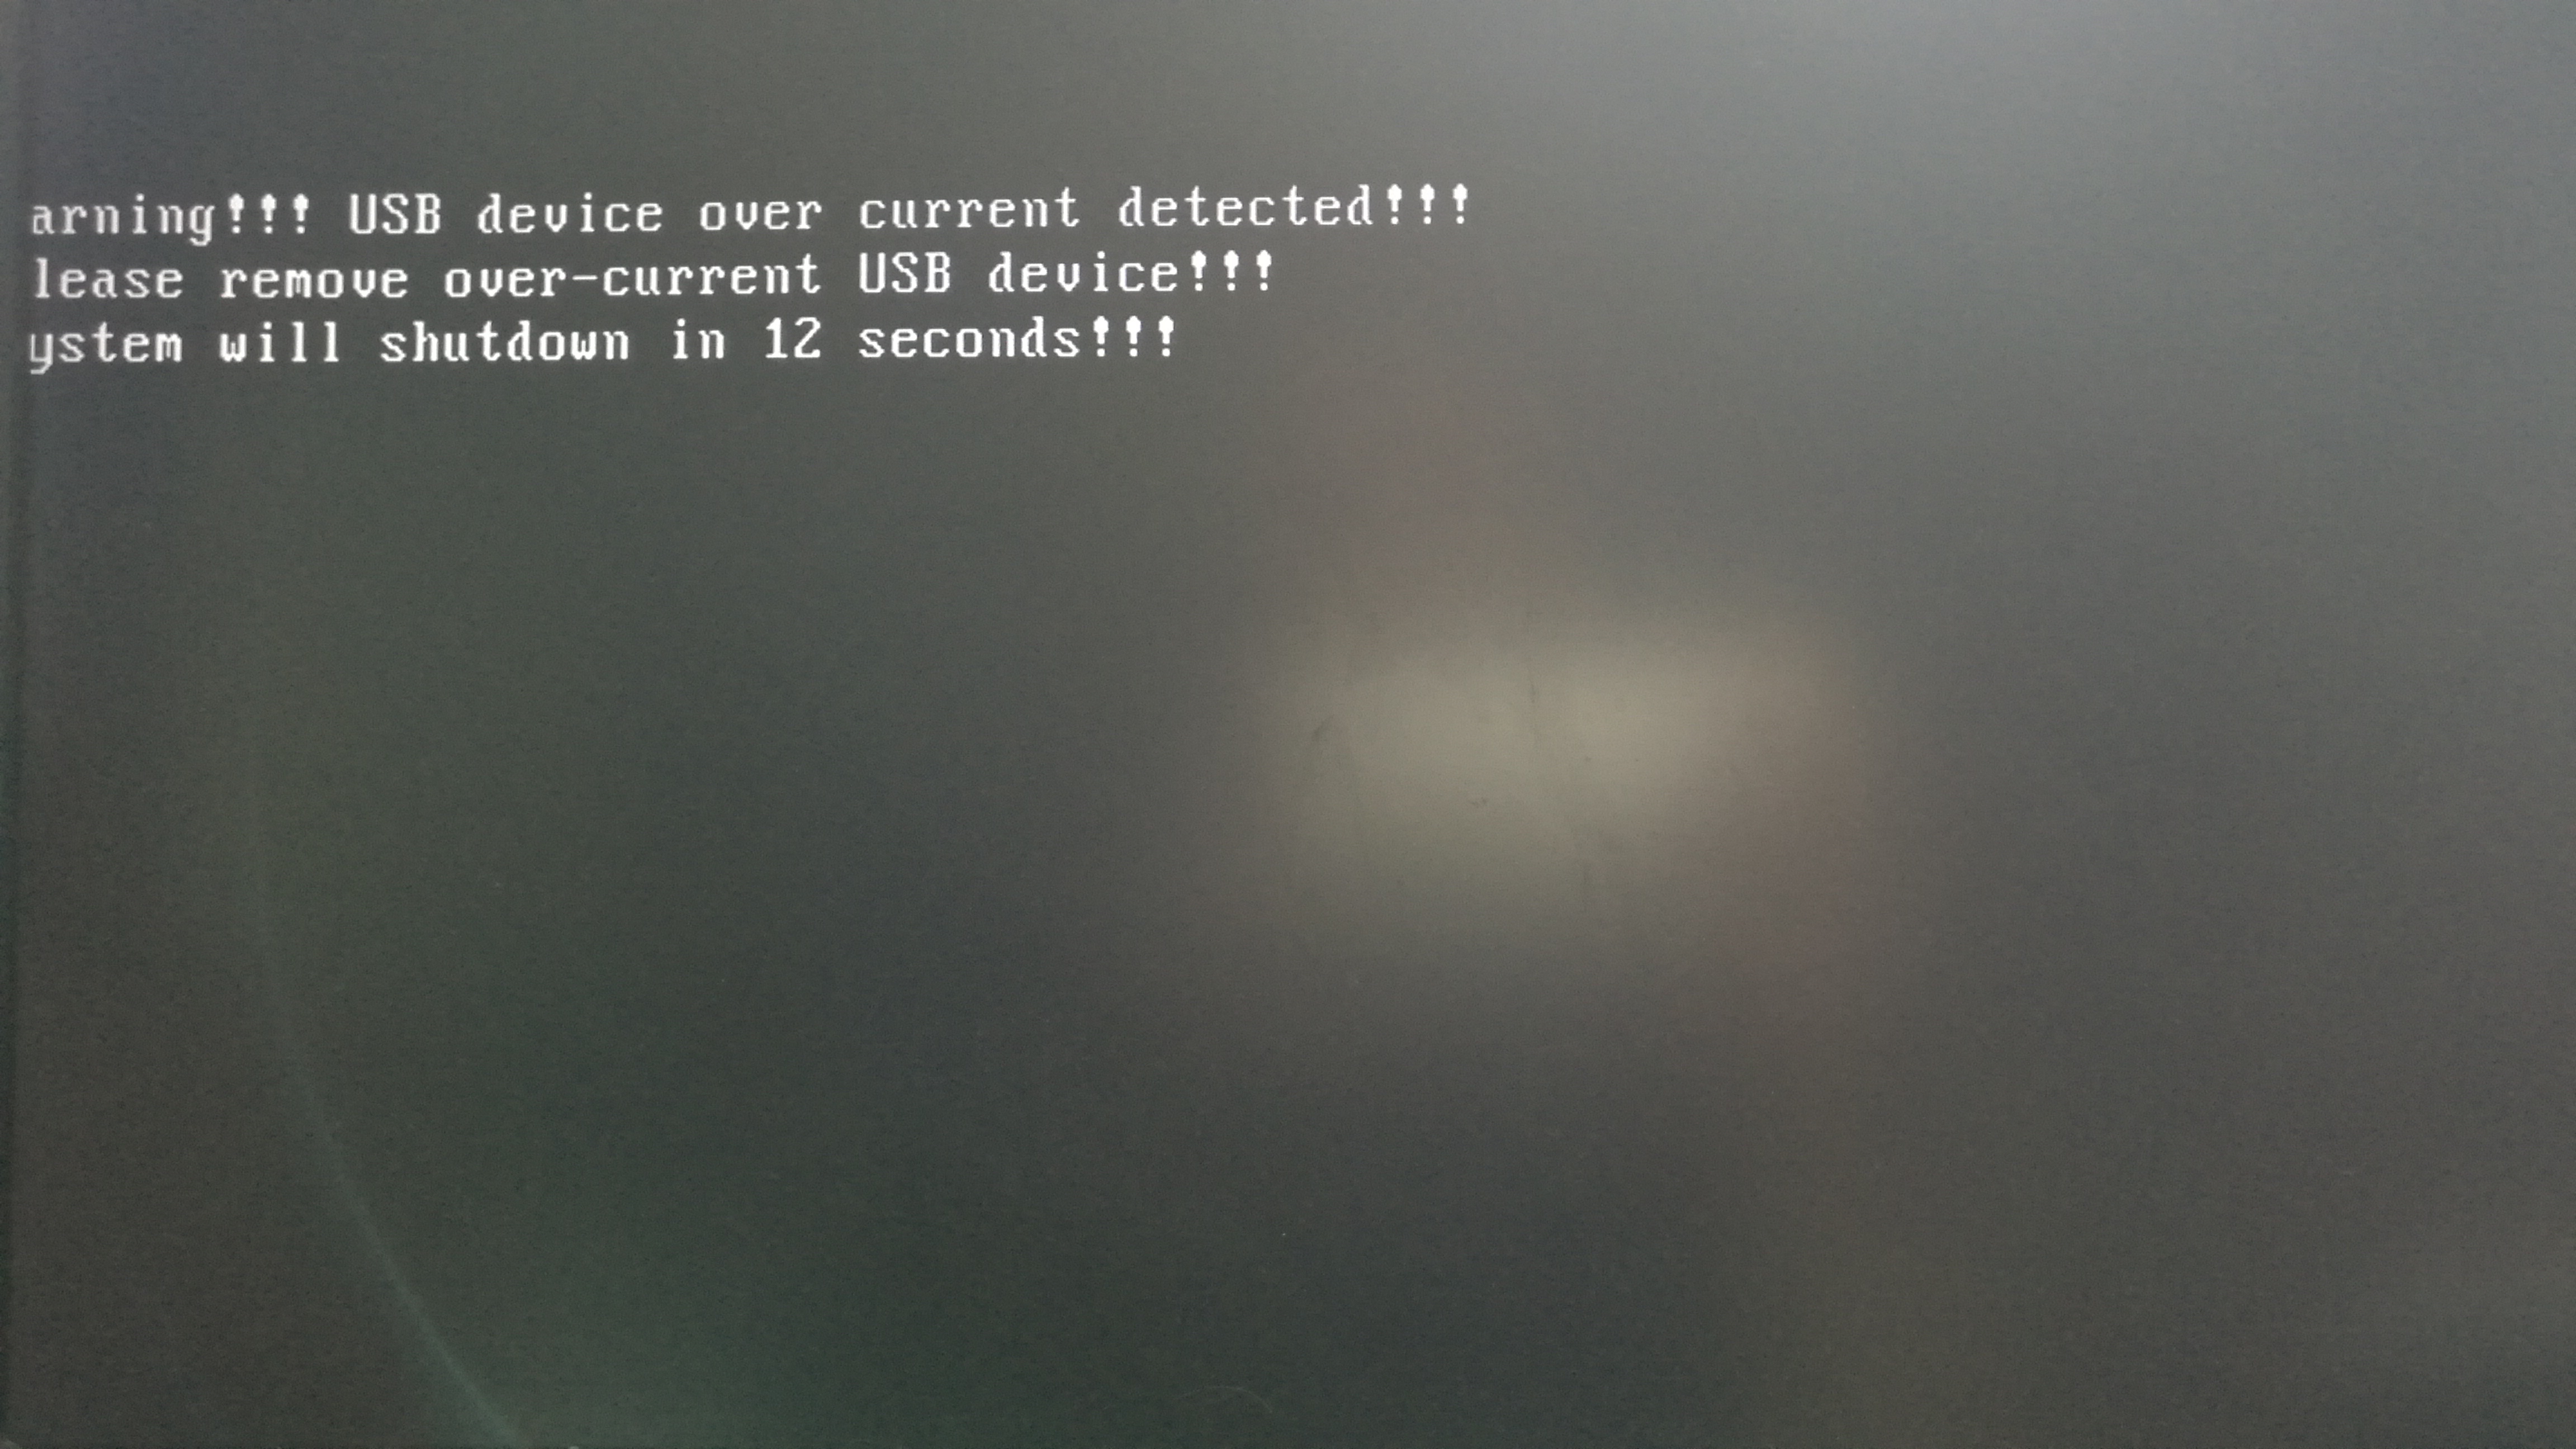 Usb over status detected. USB device over current status detected.